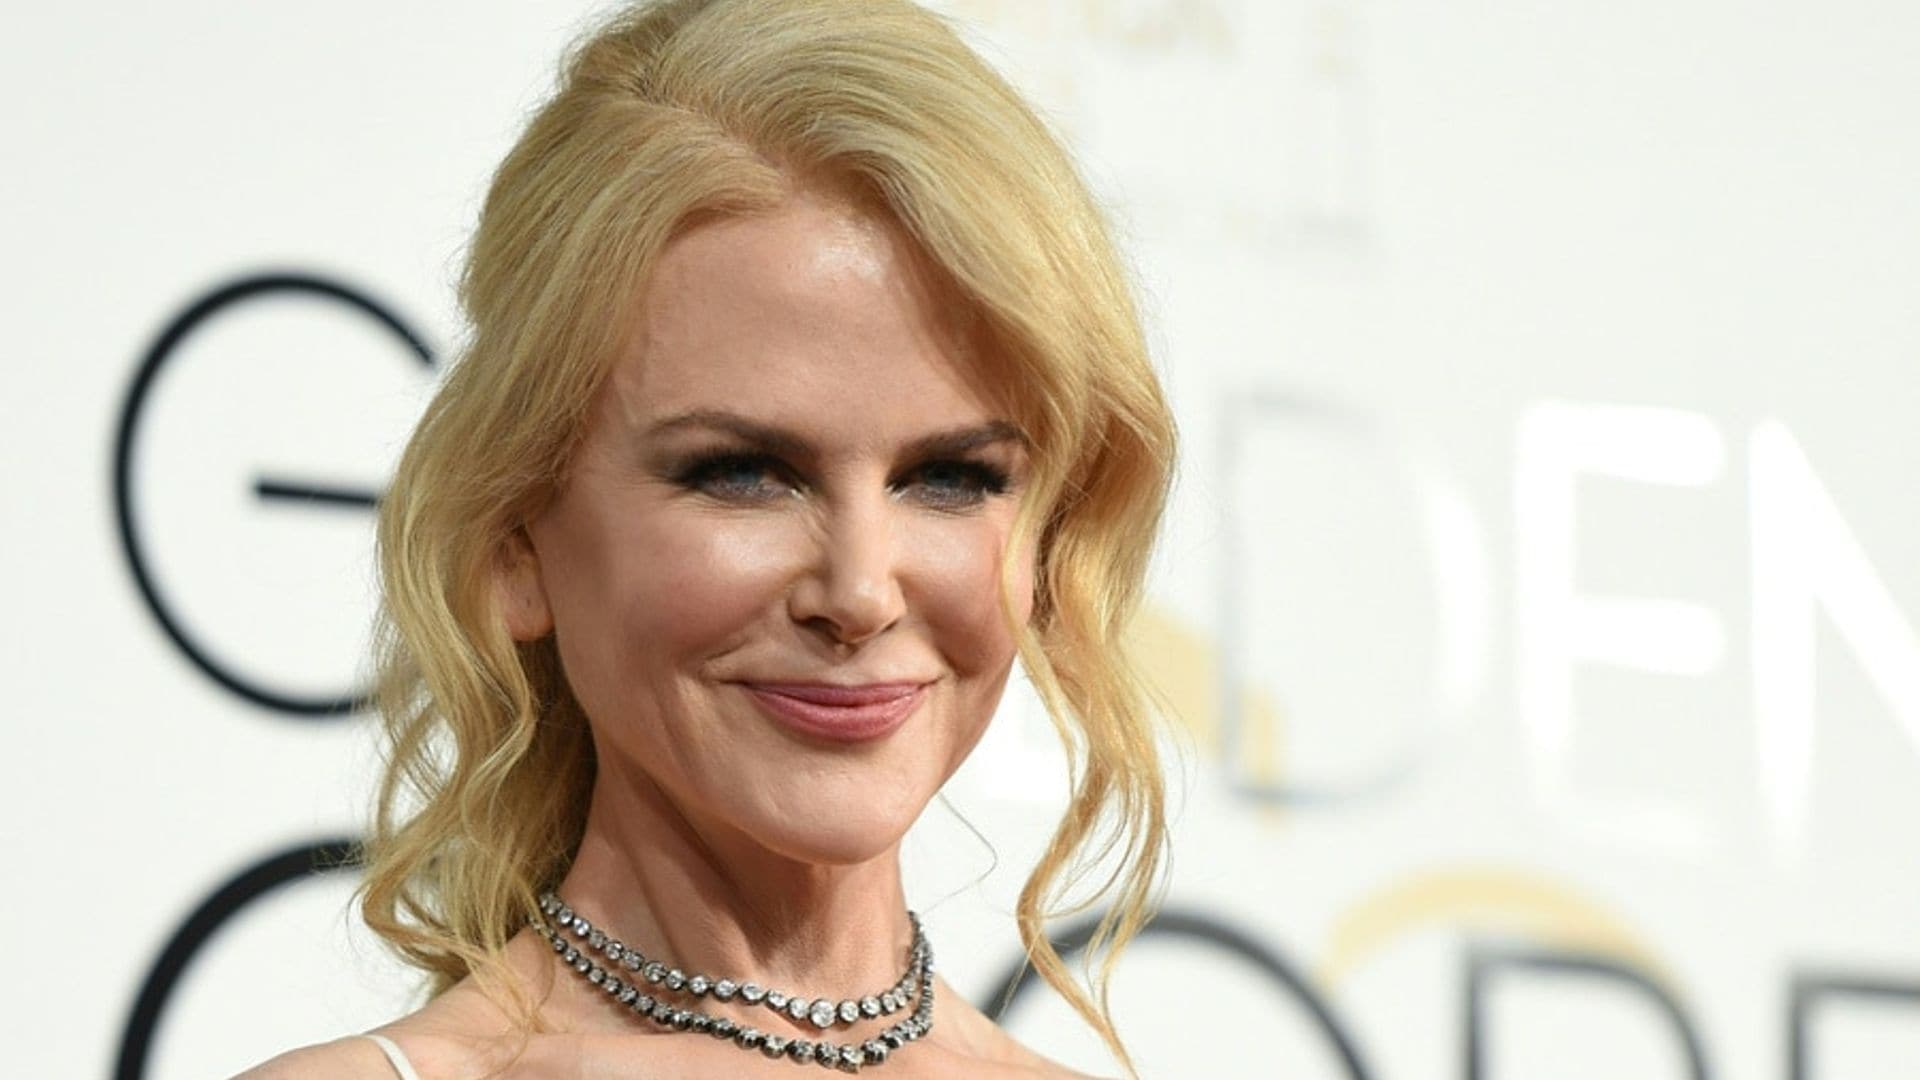 Nicole Kidman on having more kids: 'I'm past that point now'